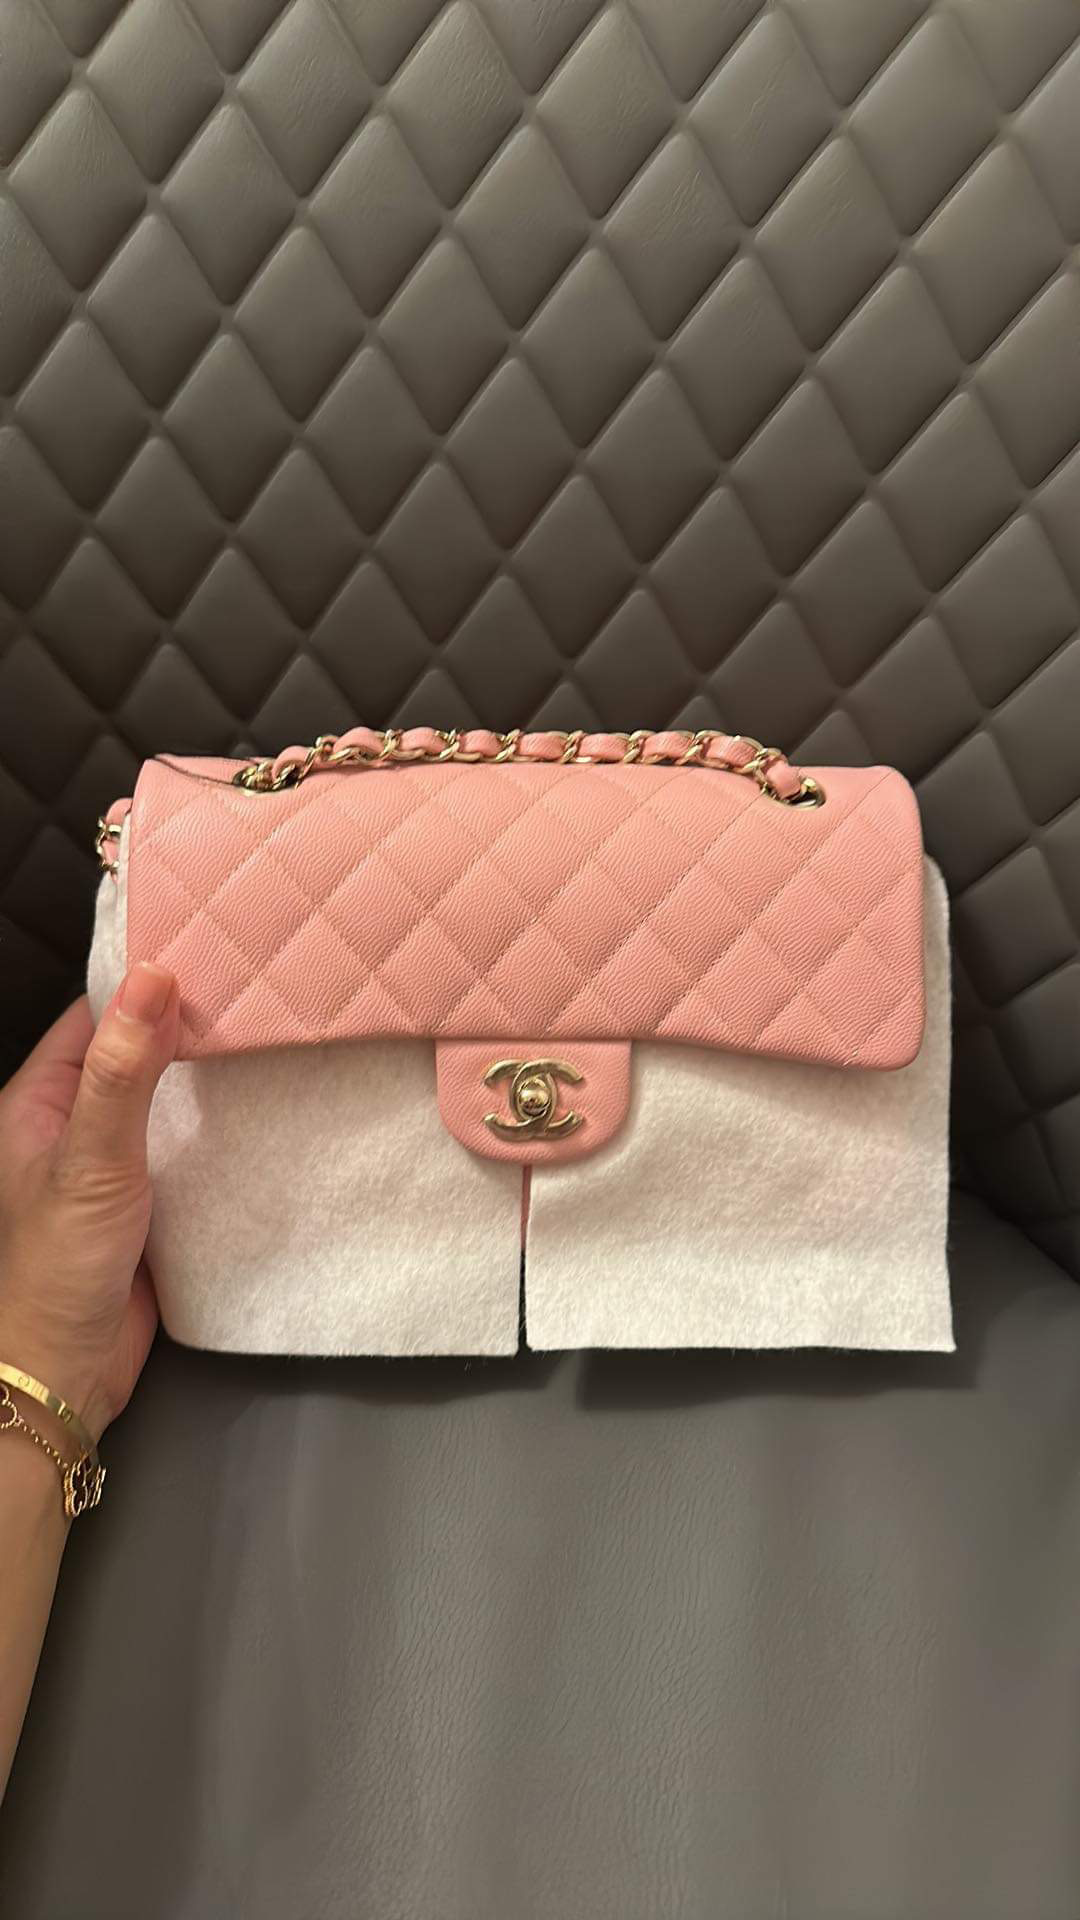 women s pink chanel bag new